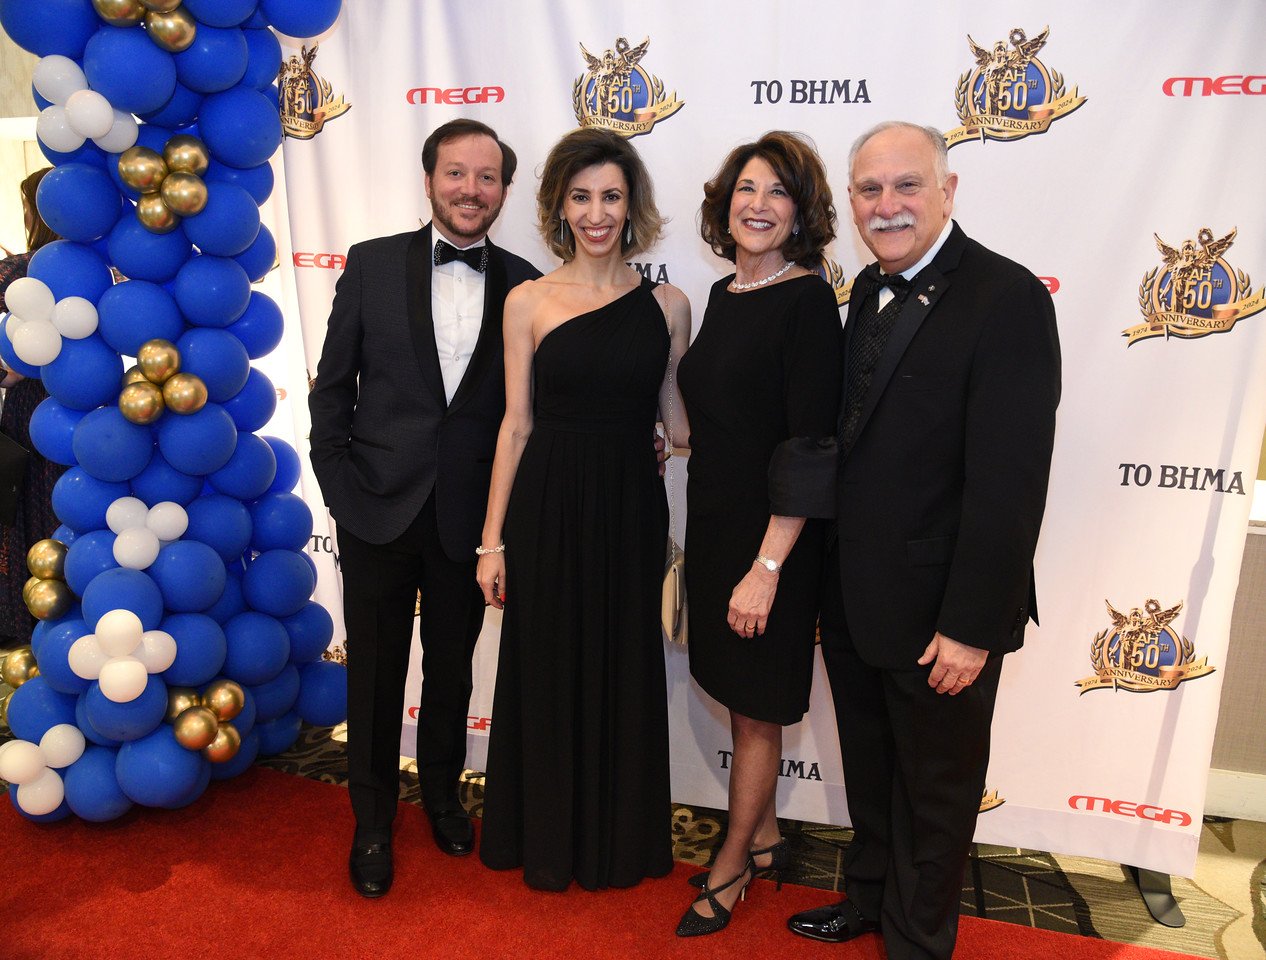  AHI Board Member Georgea Polizos together with supporters and friends during the 50th Anniversary Hellenic Heritage and National Public Service Awards. 